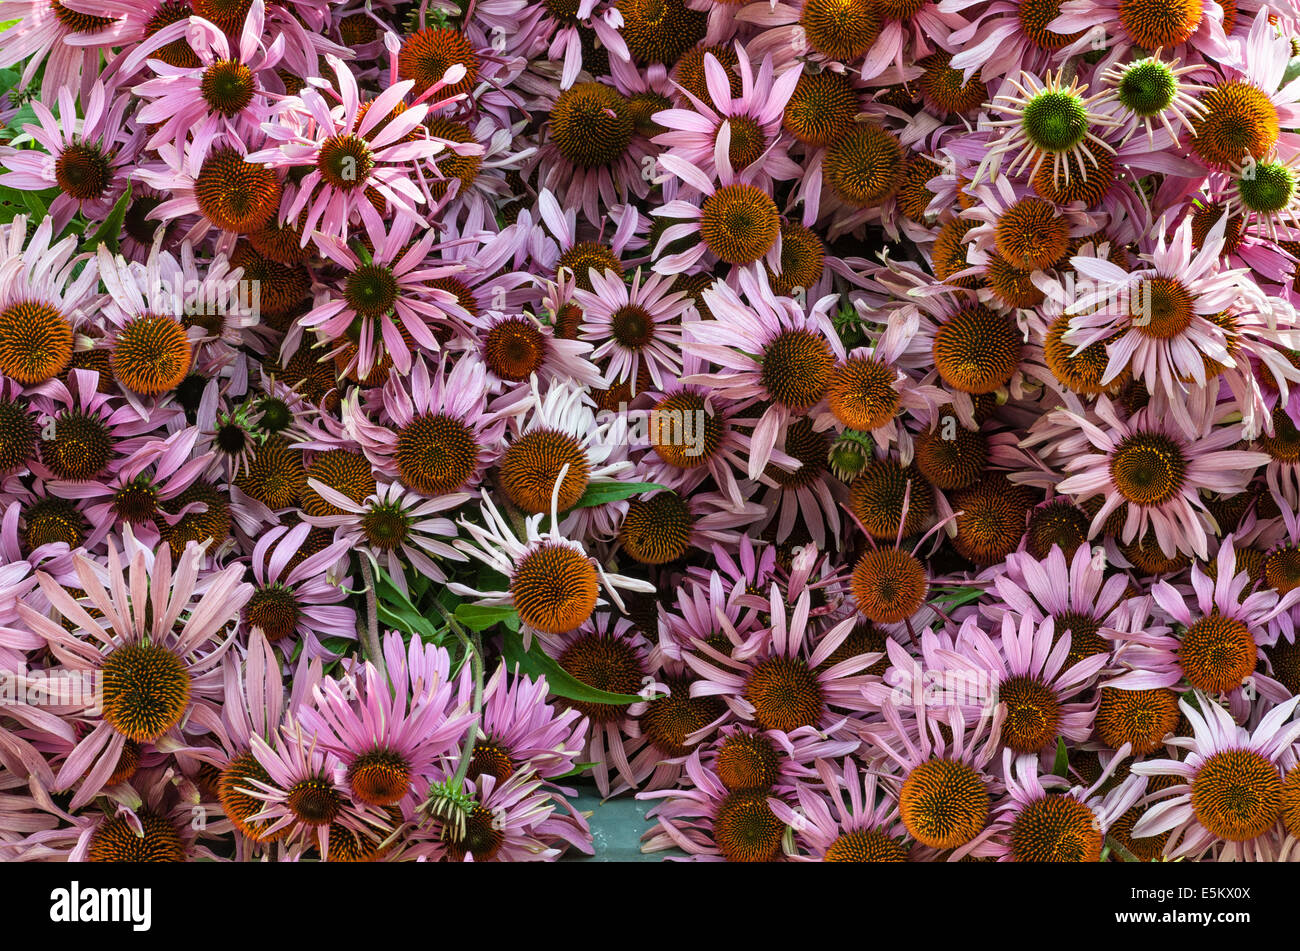 Echinacea (echinacea angustifolia) grown for organic skin care at Herbfarmacy, a herb farm in Herefordshire, UK Stock Photo